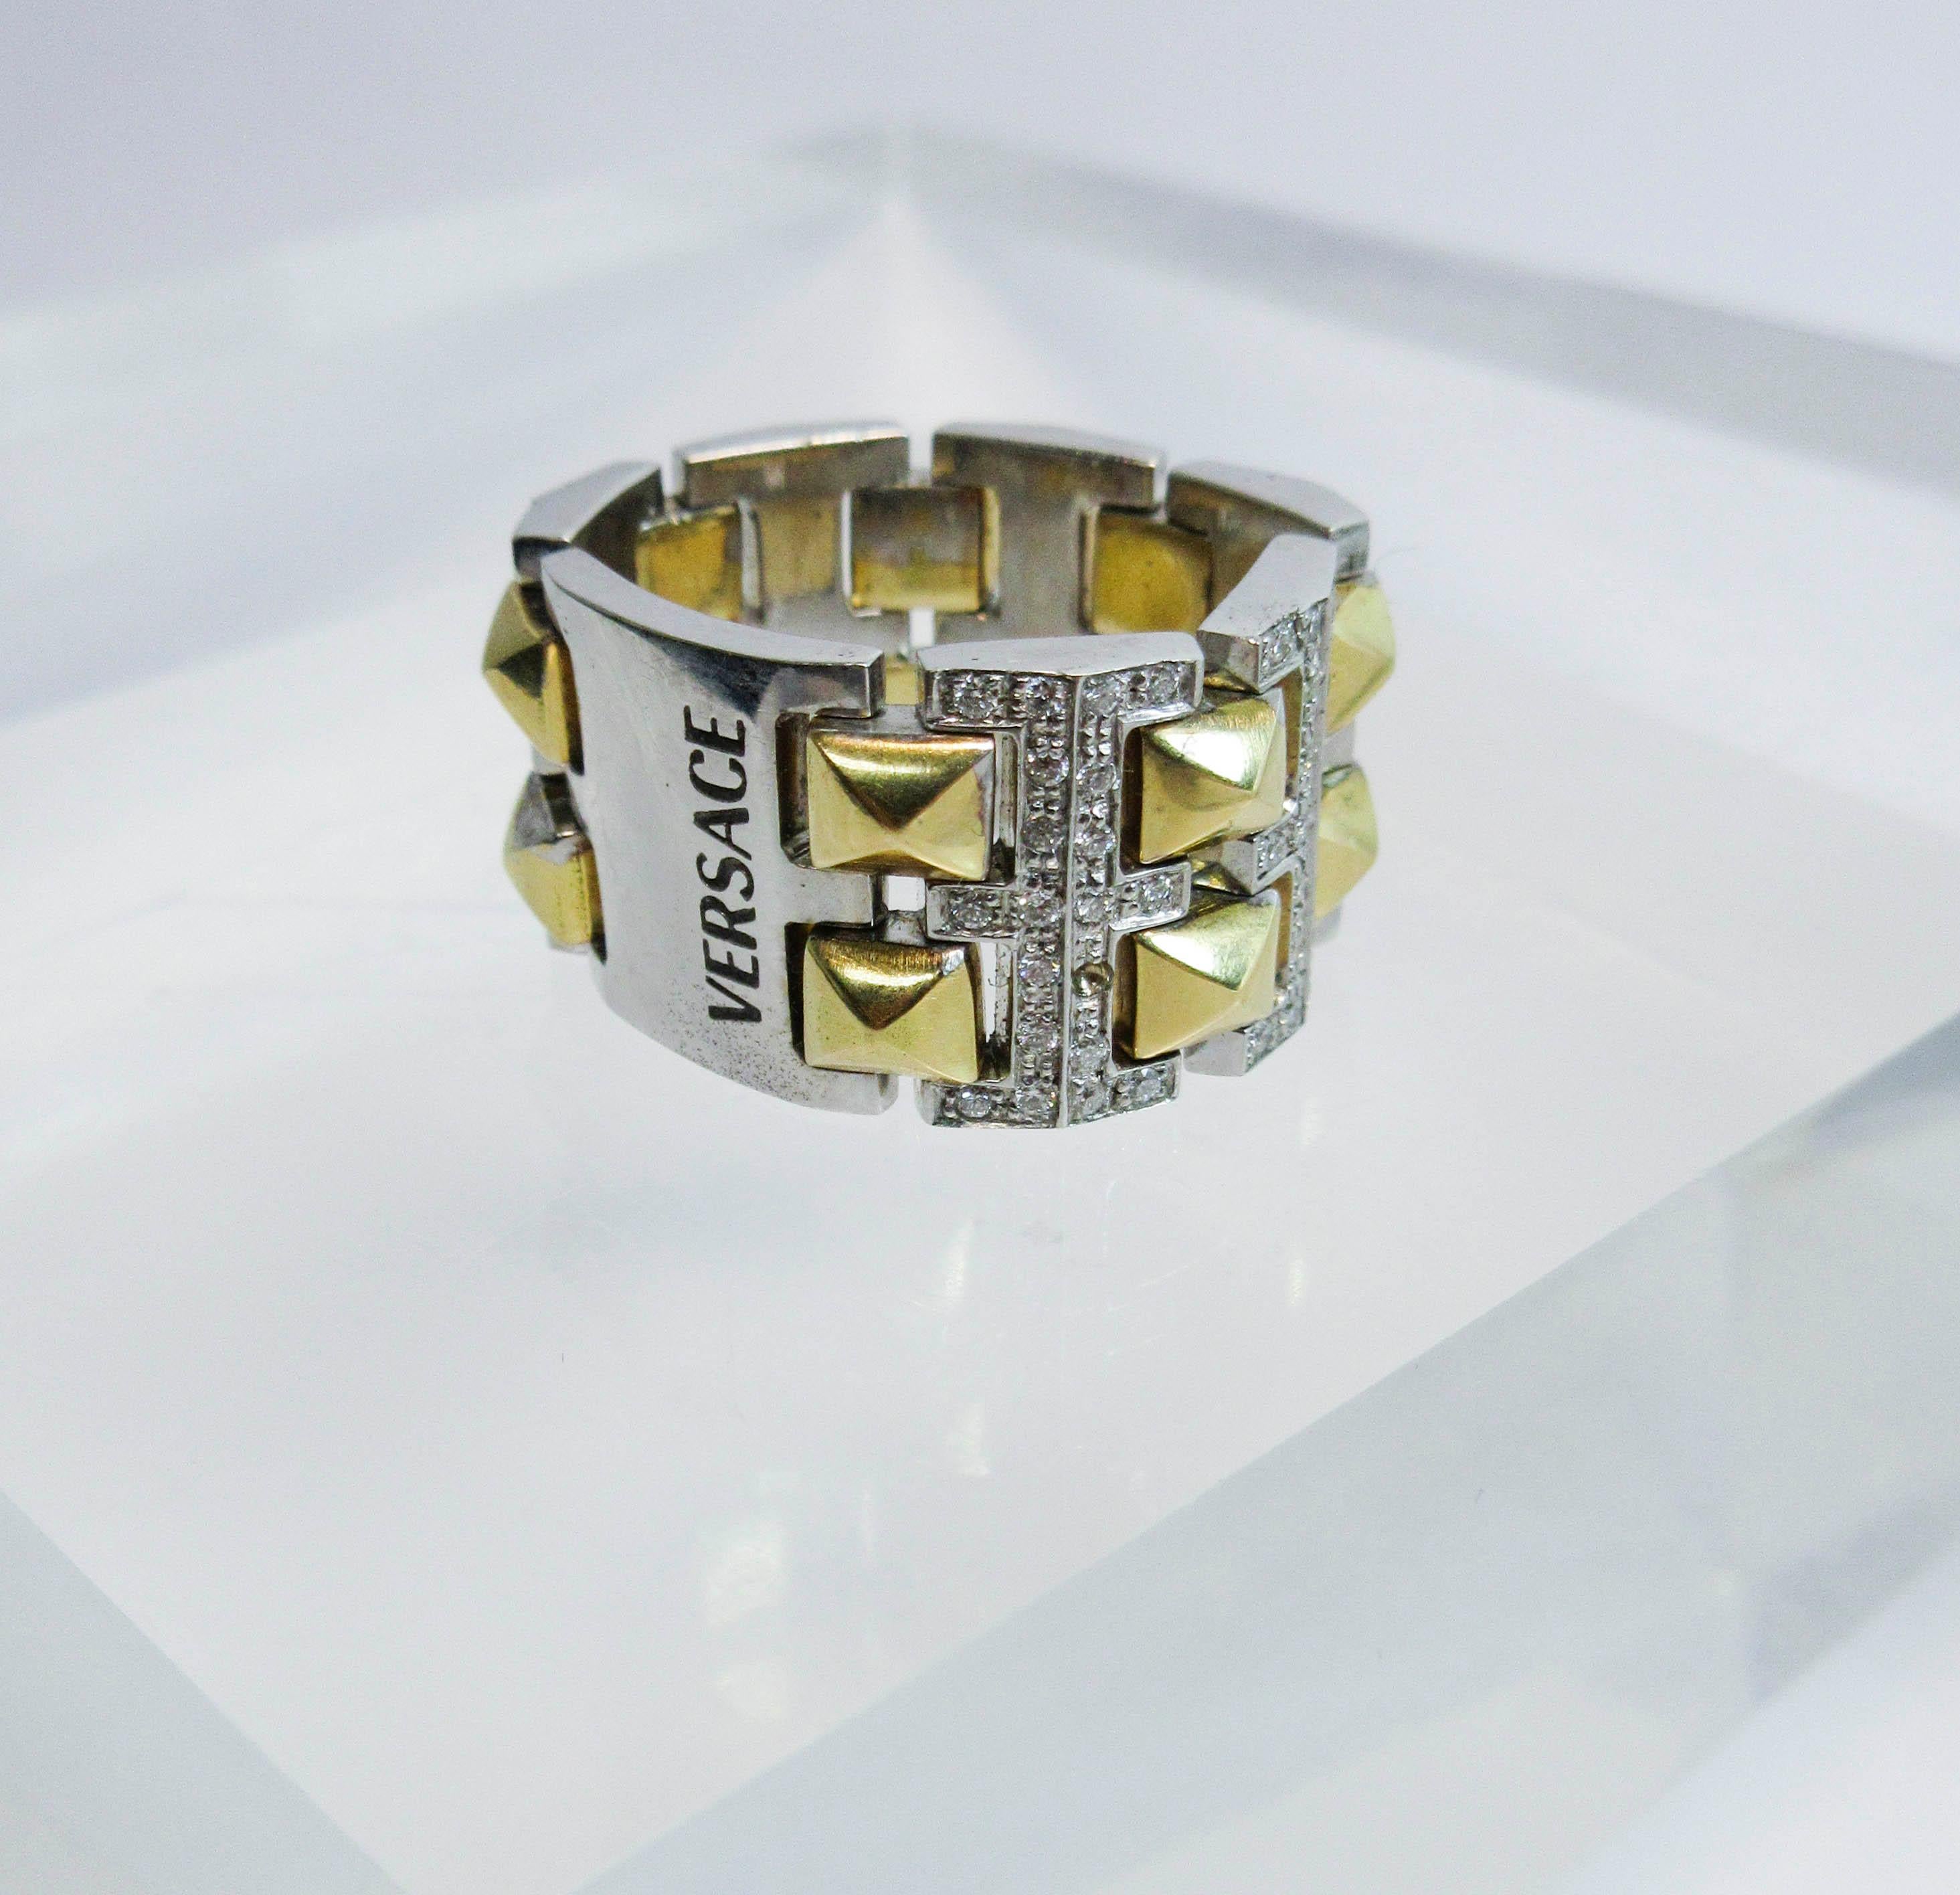 This Versace design ring is composed of white and yellow gold, and features approximately 0.60cts of diamonds.  Size 6. Please feel free to ask us any additional questions you may have.